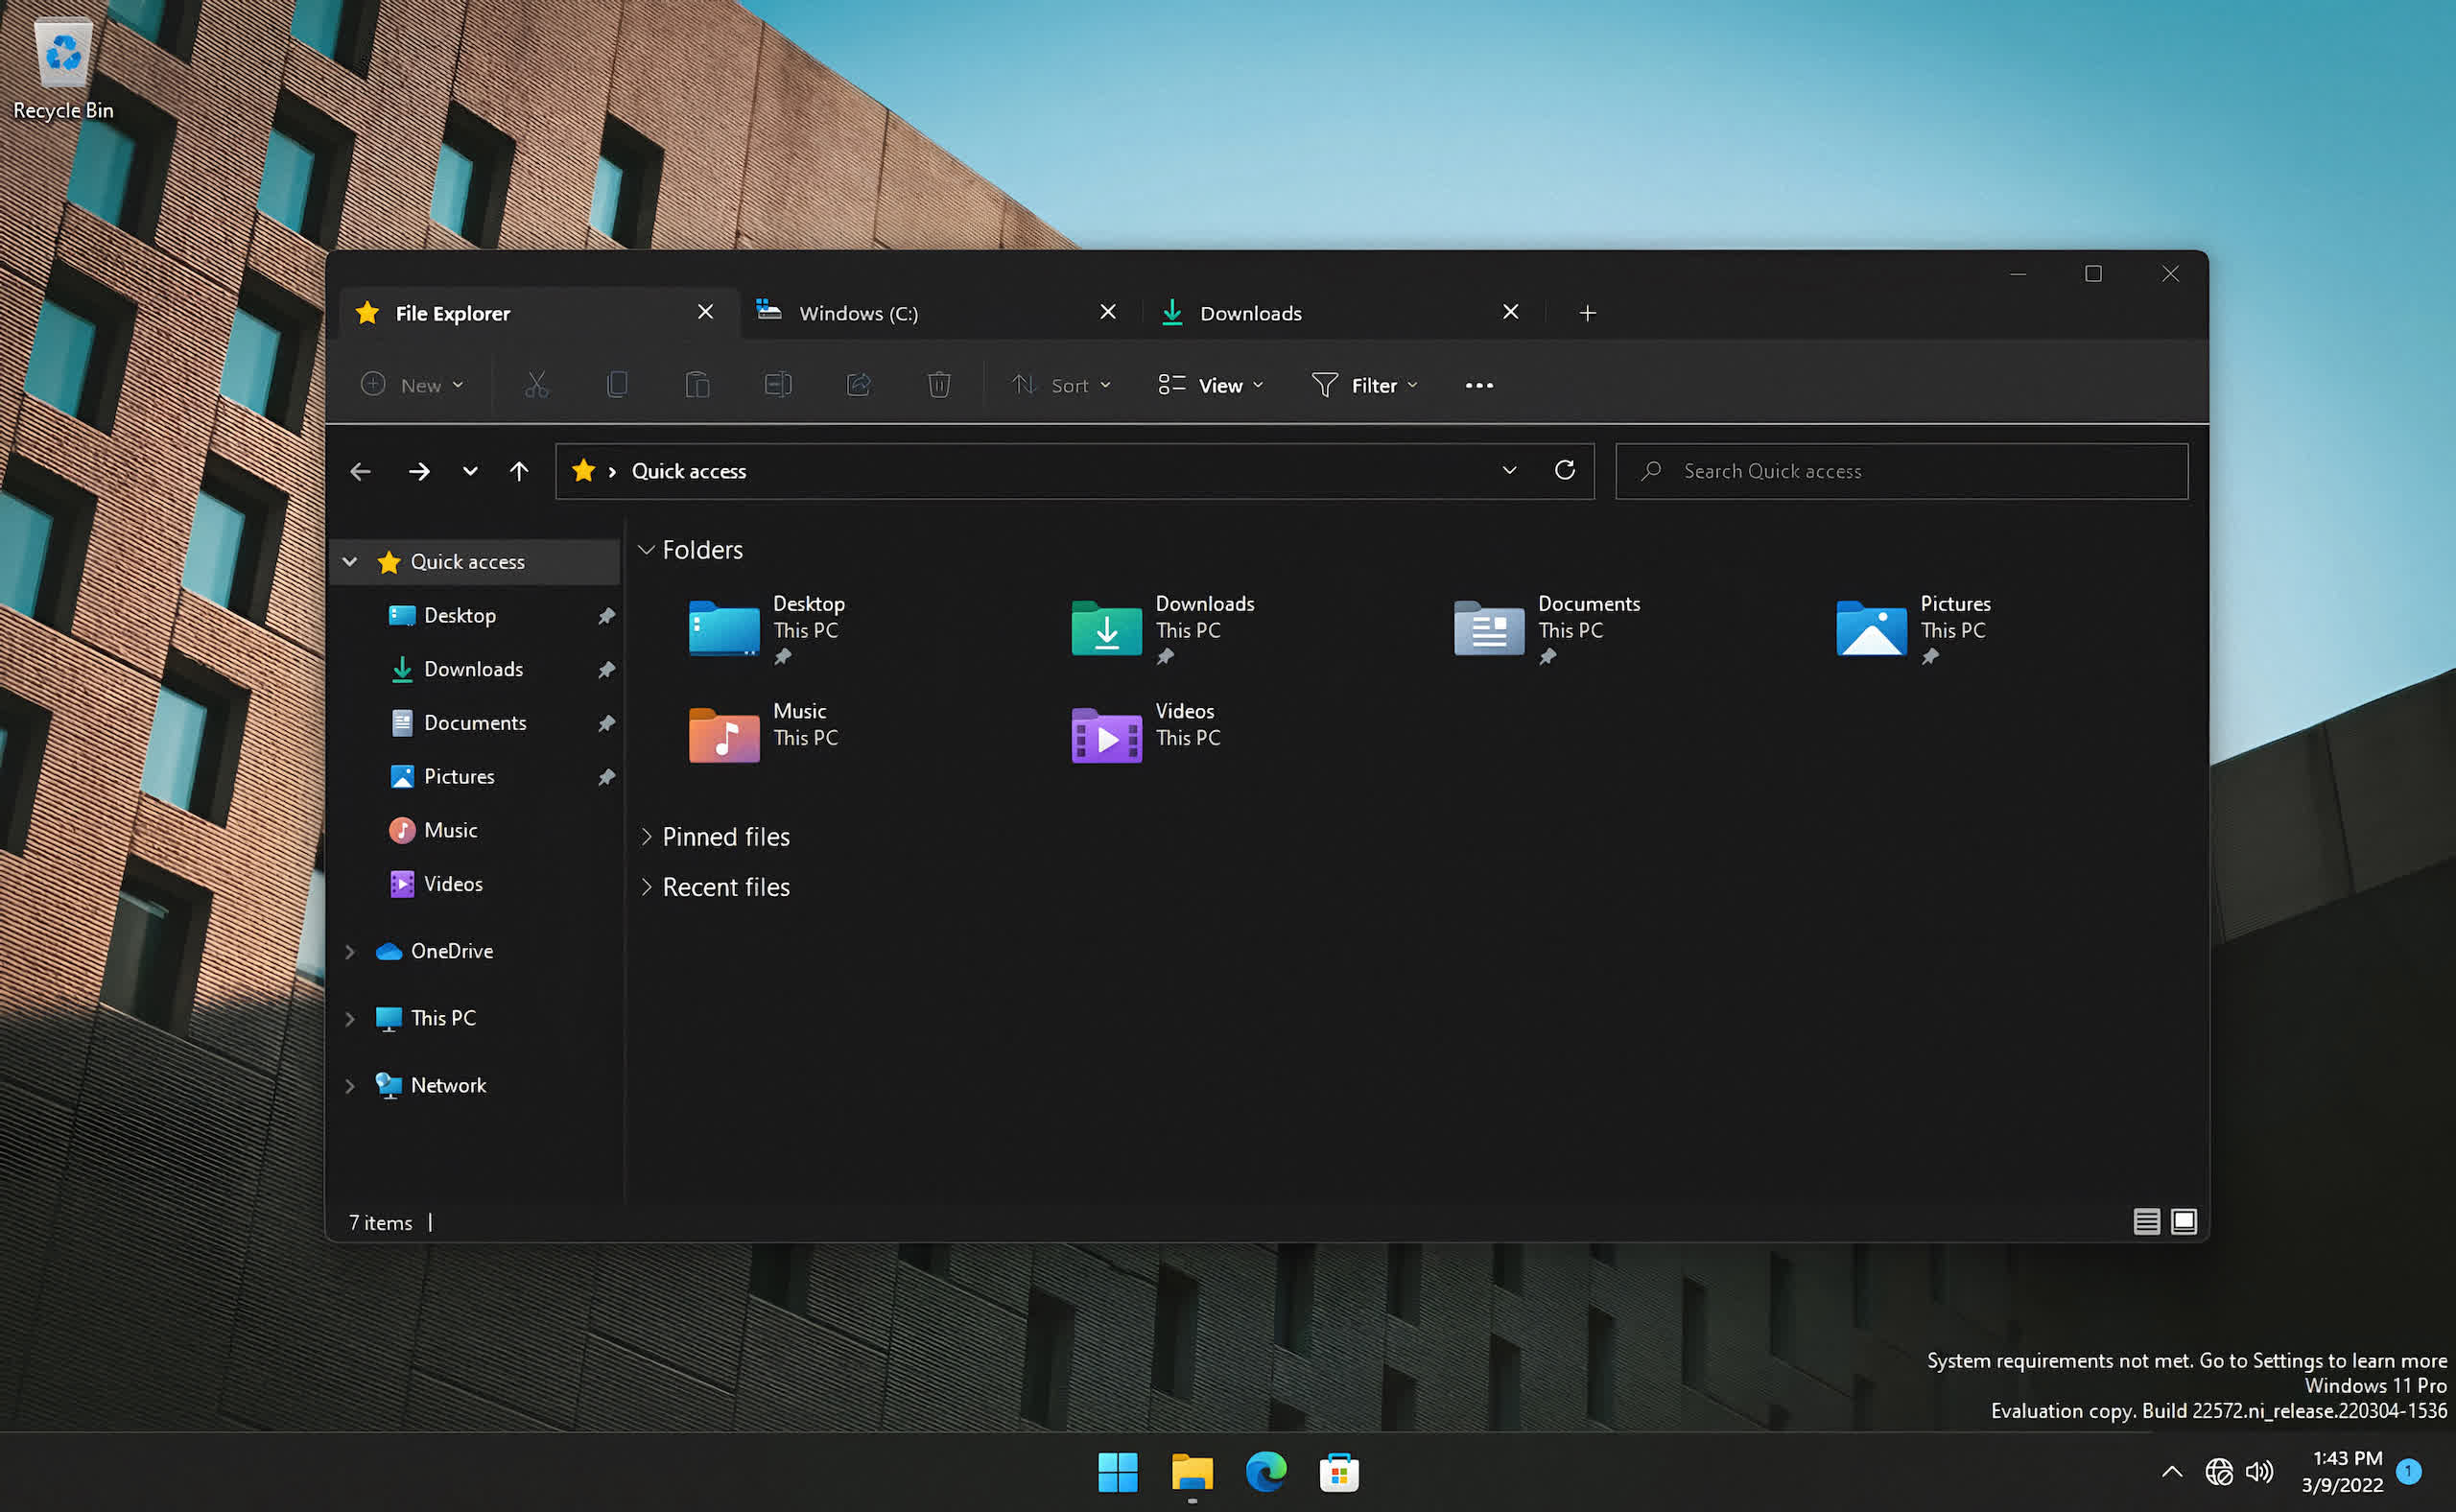 Microsoft is planning to bring tabs to File Explorer in Windows 11